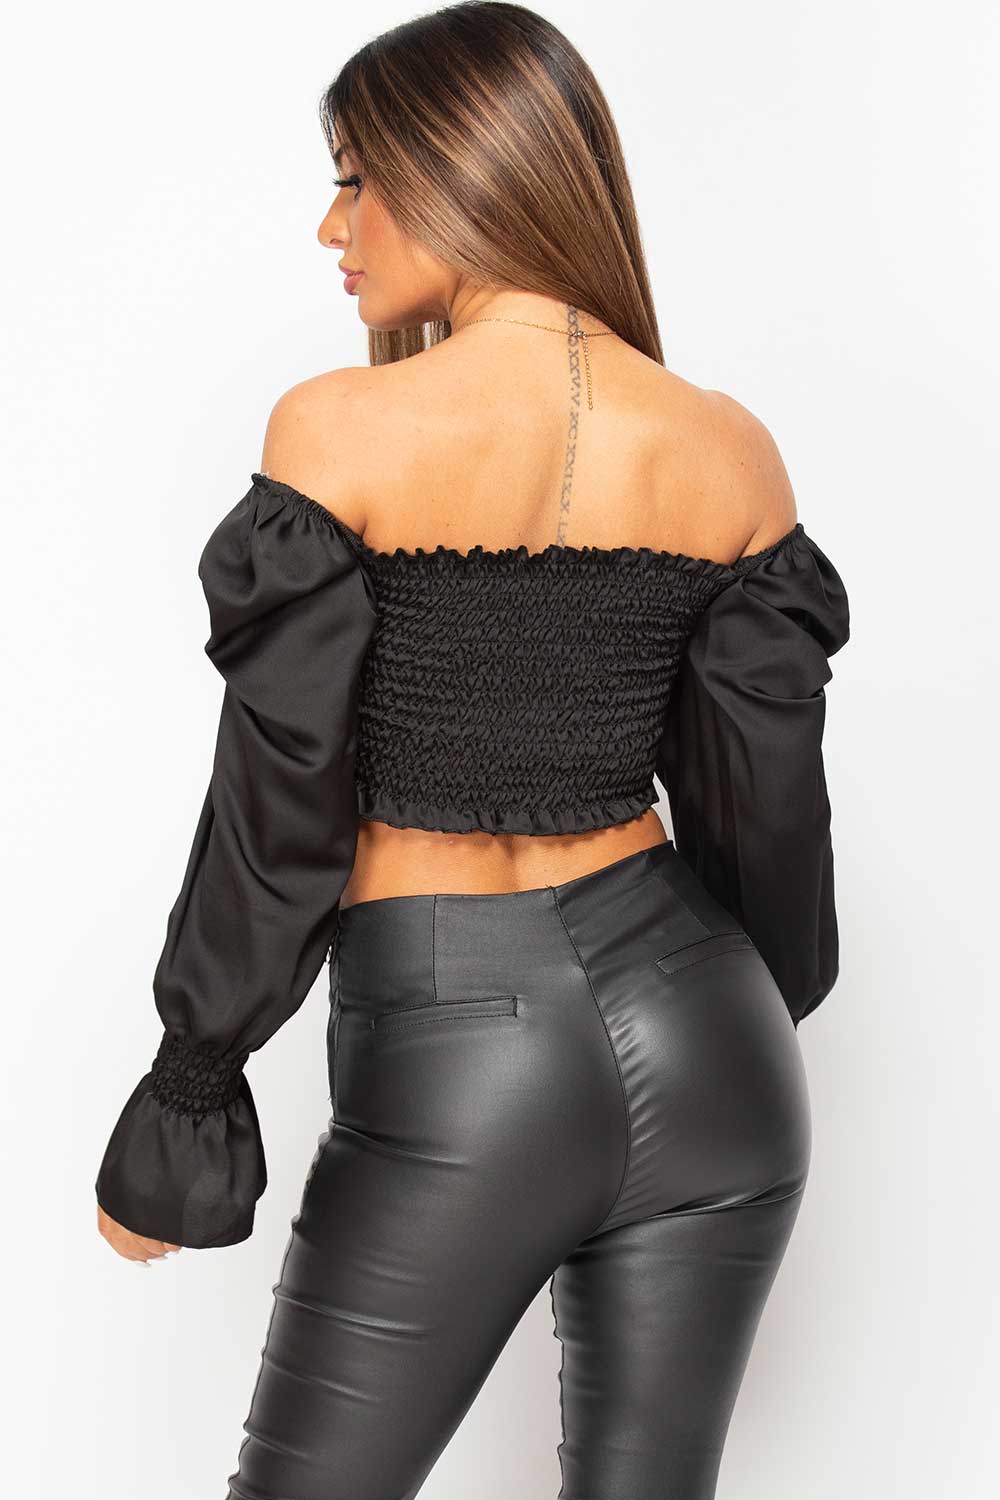 black satin going out crop top